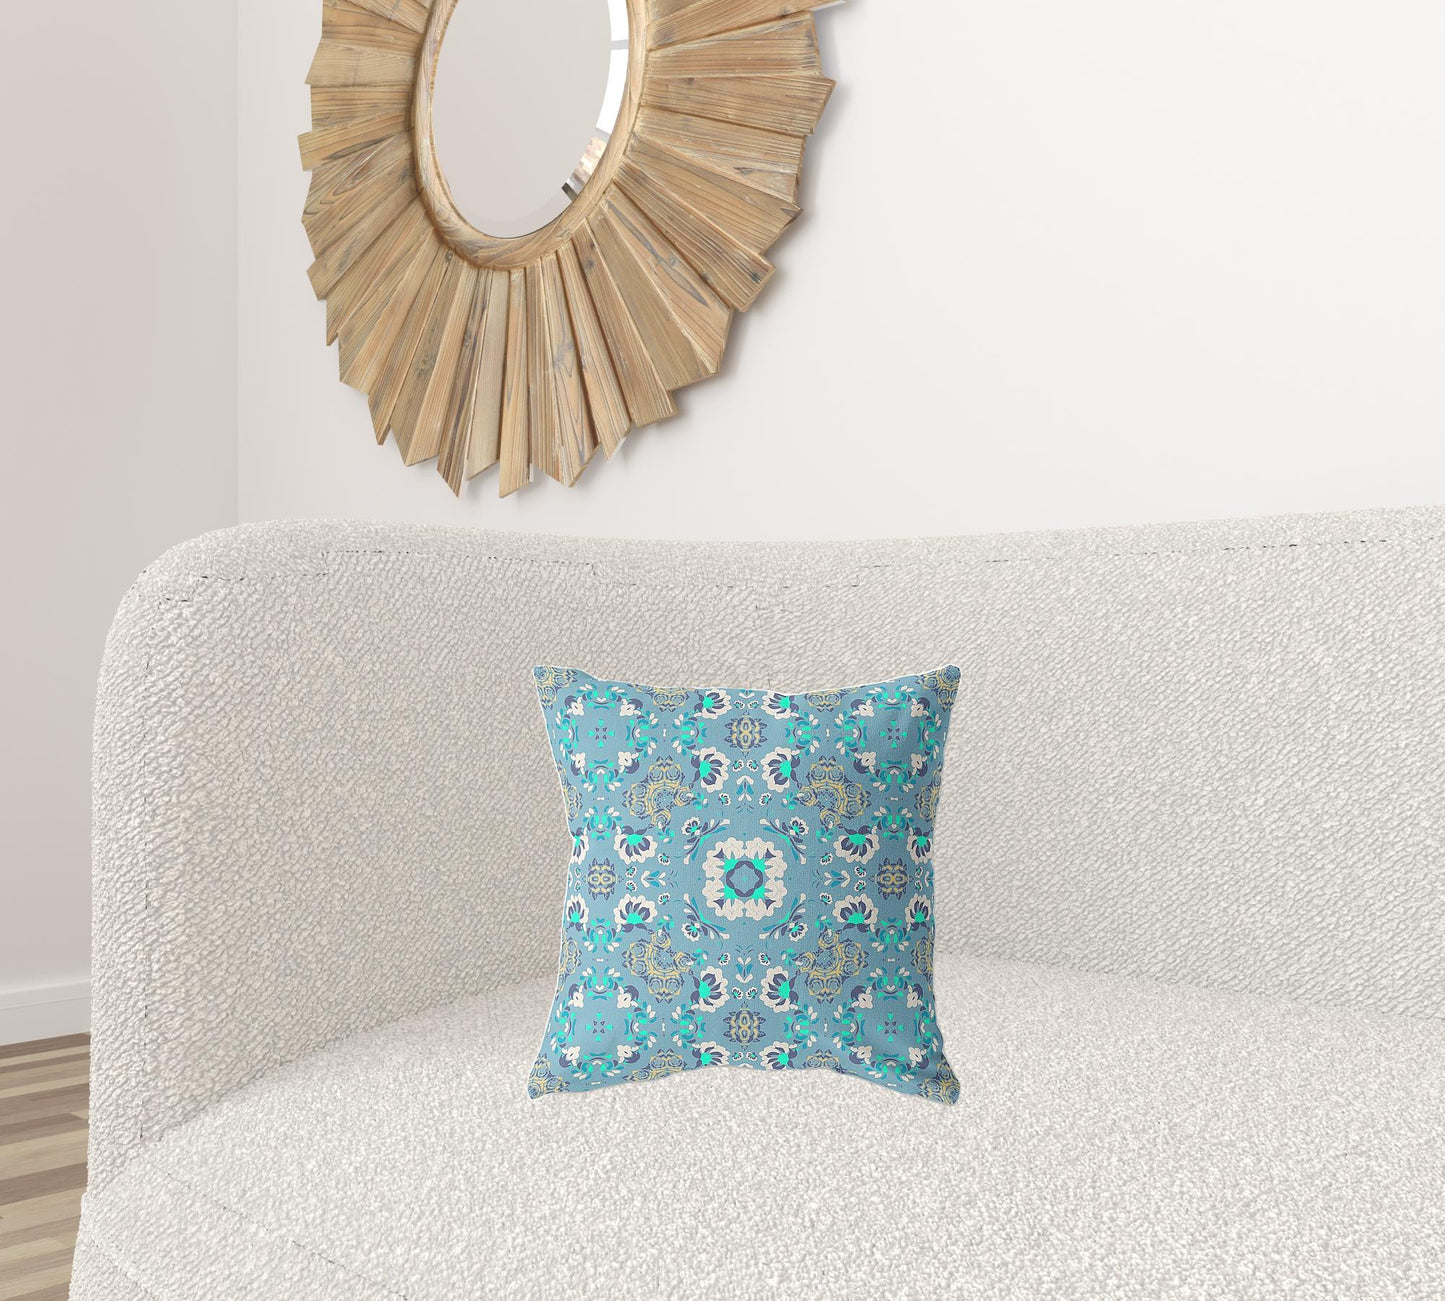 16" X 16" Light Blue Broadcloth Floral Throw Pillow